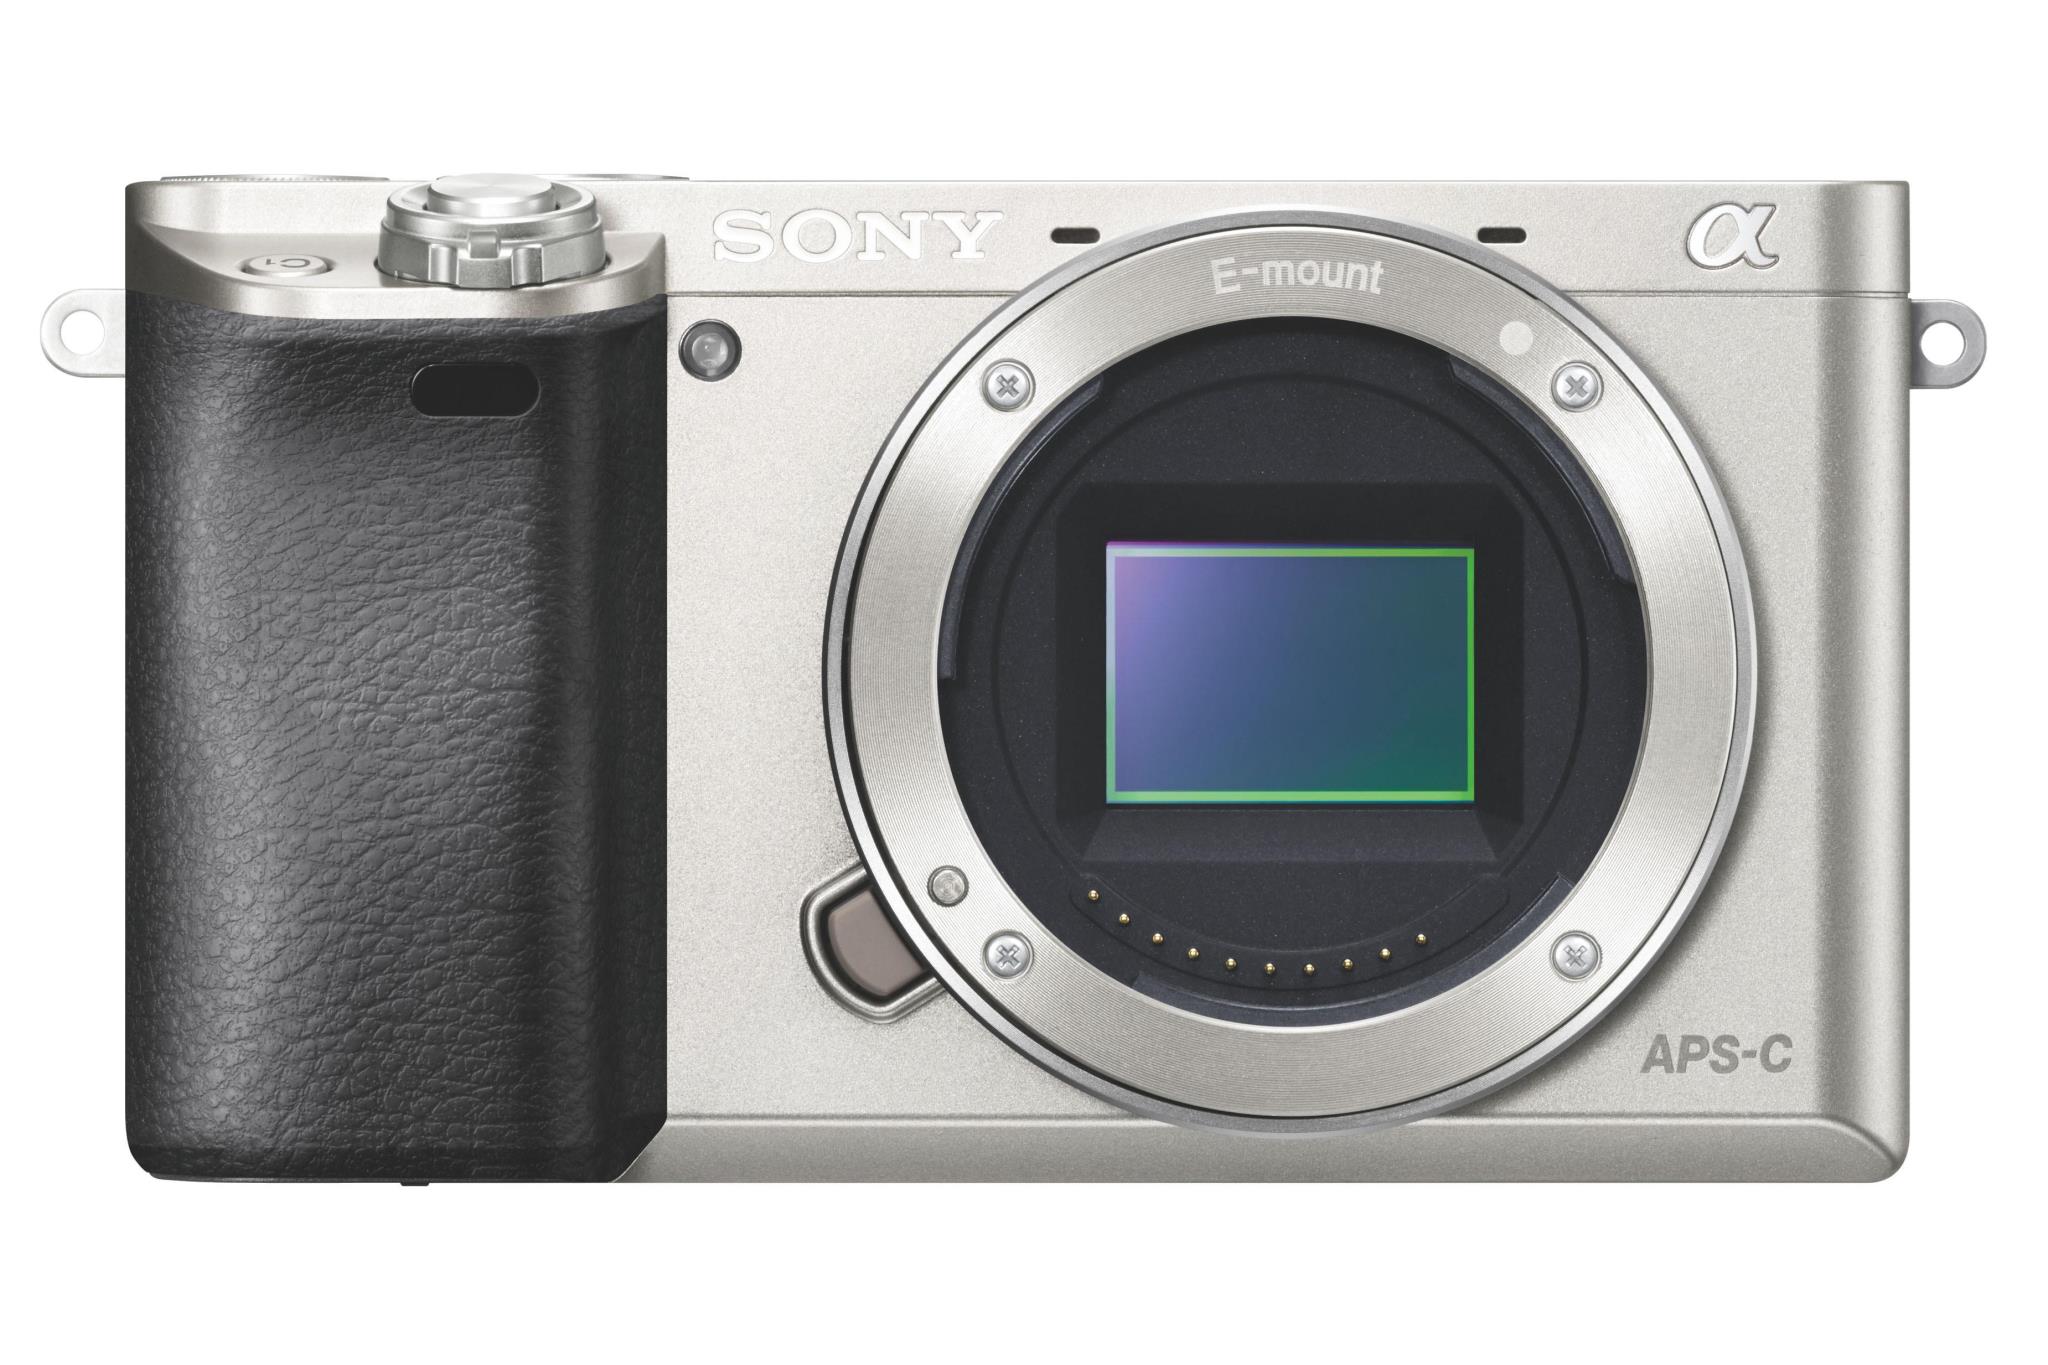 sony-alpha-a6000-csc-camera-silver-body-only-24-3mp-3-0lcd-fhd-ilce6000s-cec-b8a52e73-18f4-497d-a5fa-da6b60f169ec